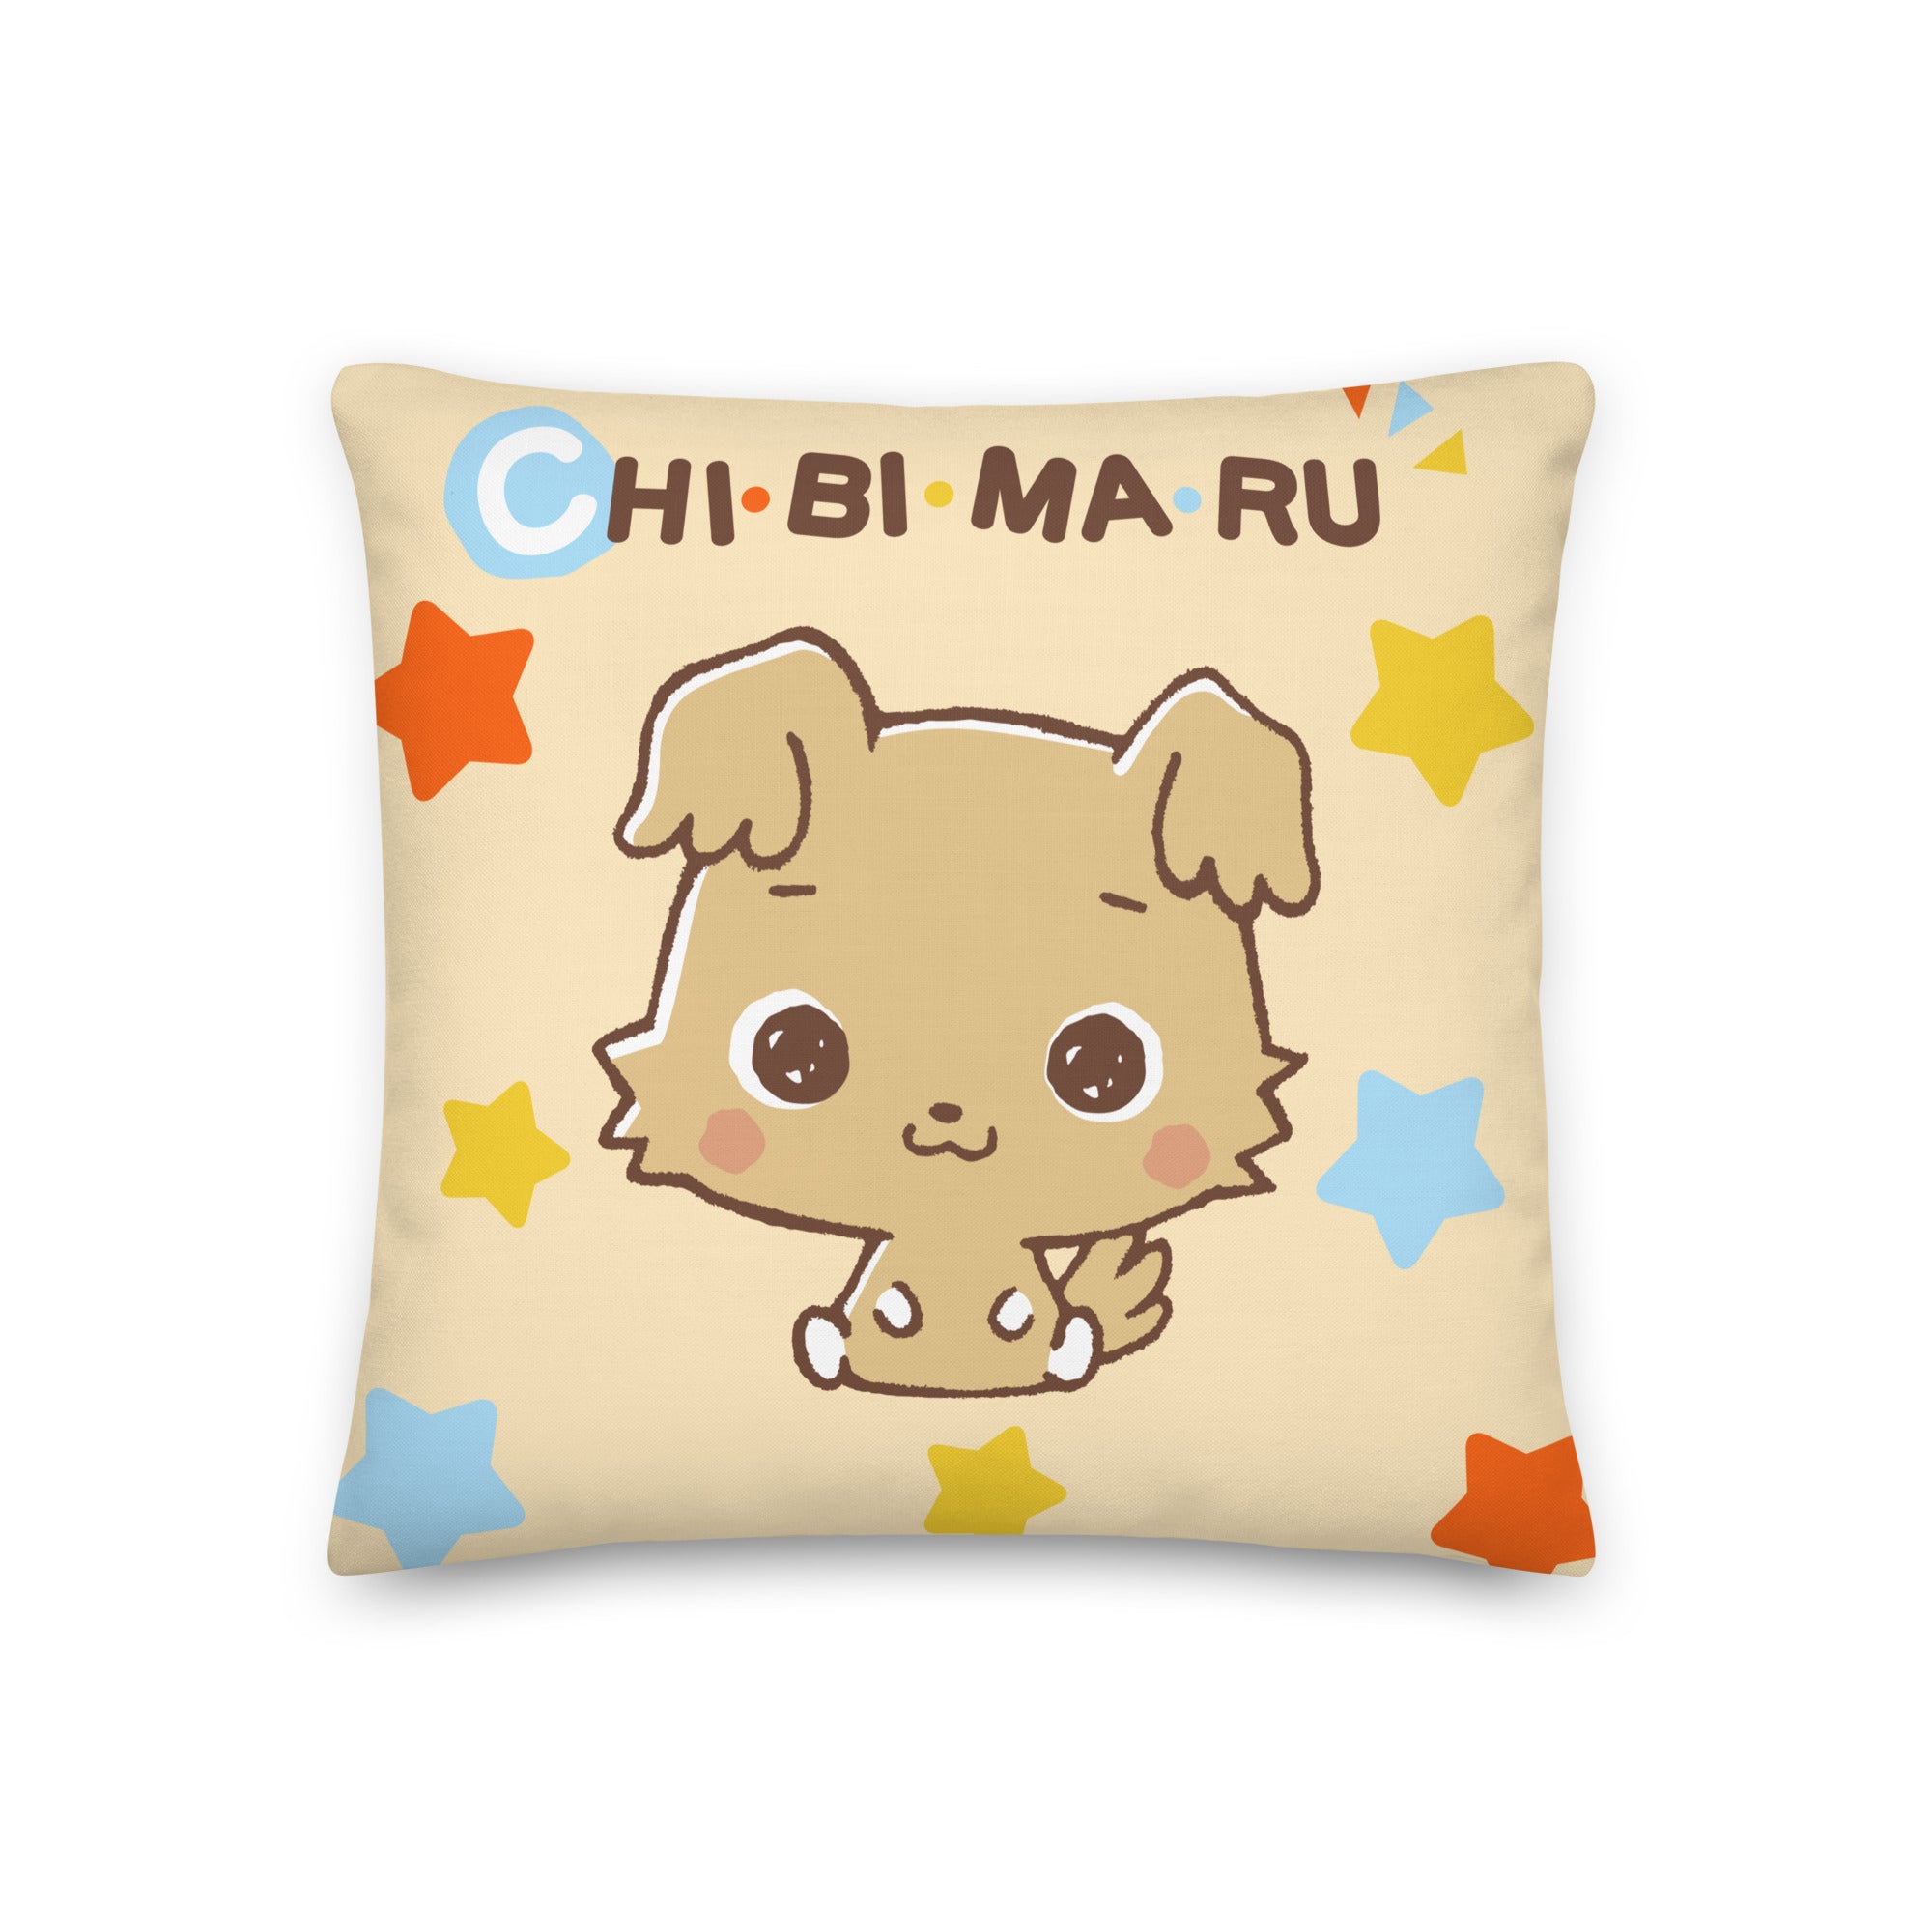 Chibimaru Cheerful Pup 18" Square Pillow Home Goods Printful Default Title  